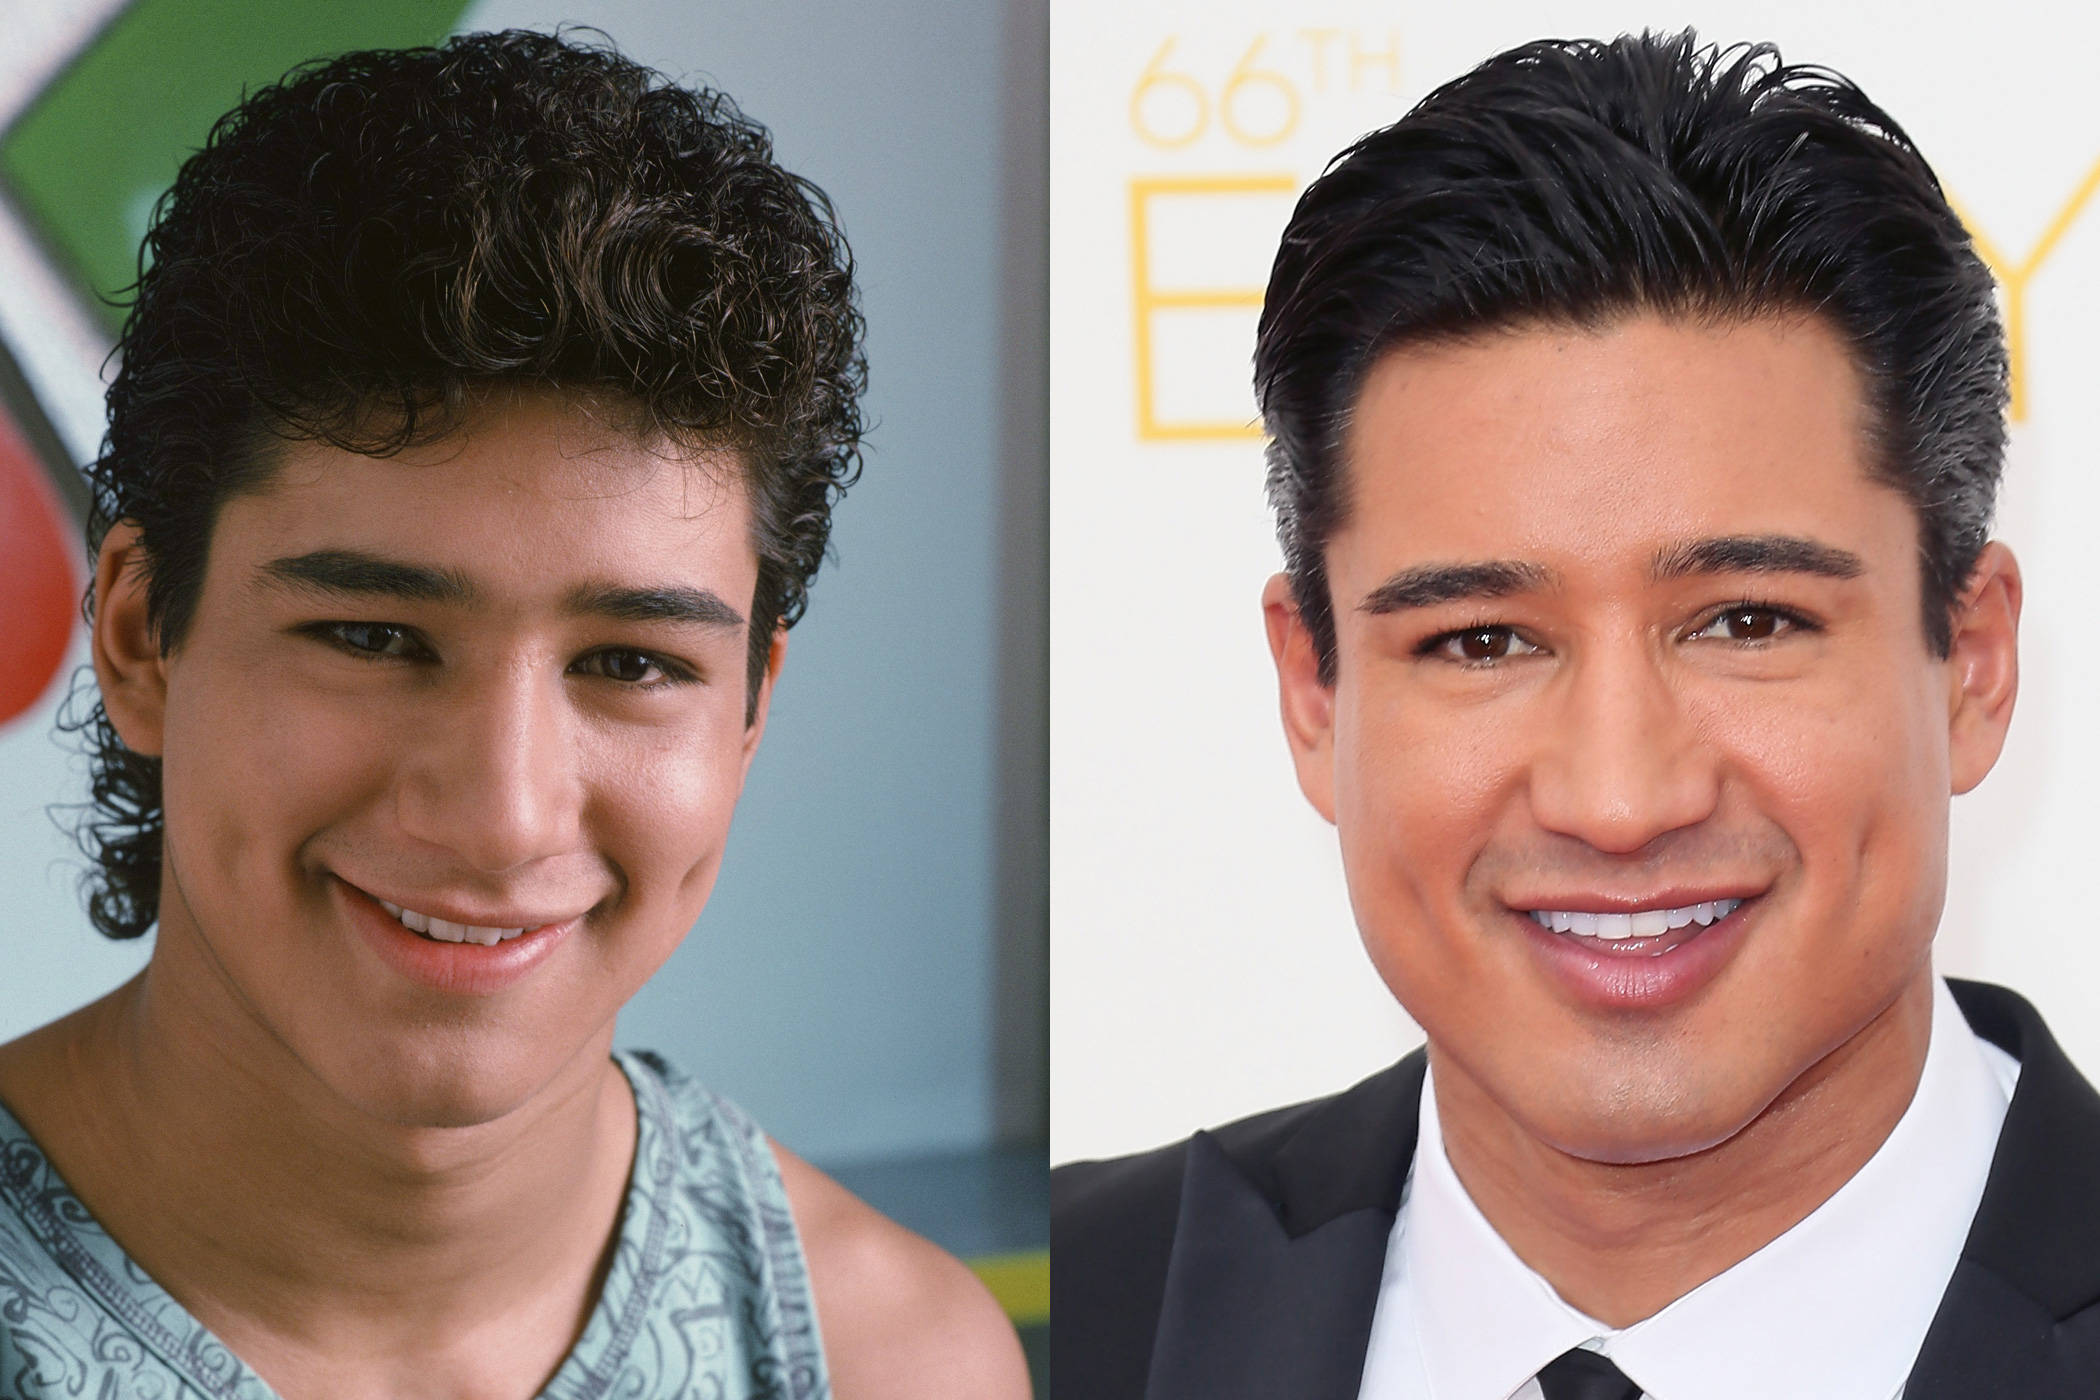 Mario Lopez, A.C. Slater: The star's career has really taken off, tackling everything from Broadway to the world of TV hosting: Lopez has hosted Extra and The X Factor.